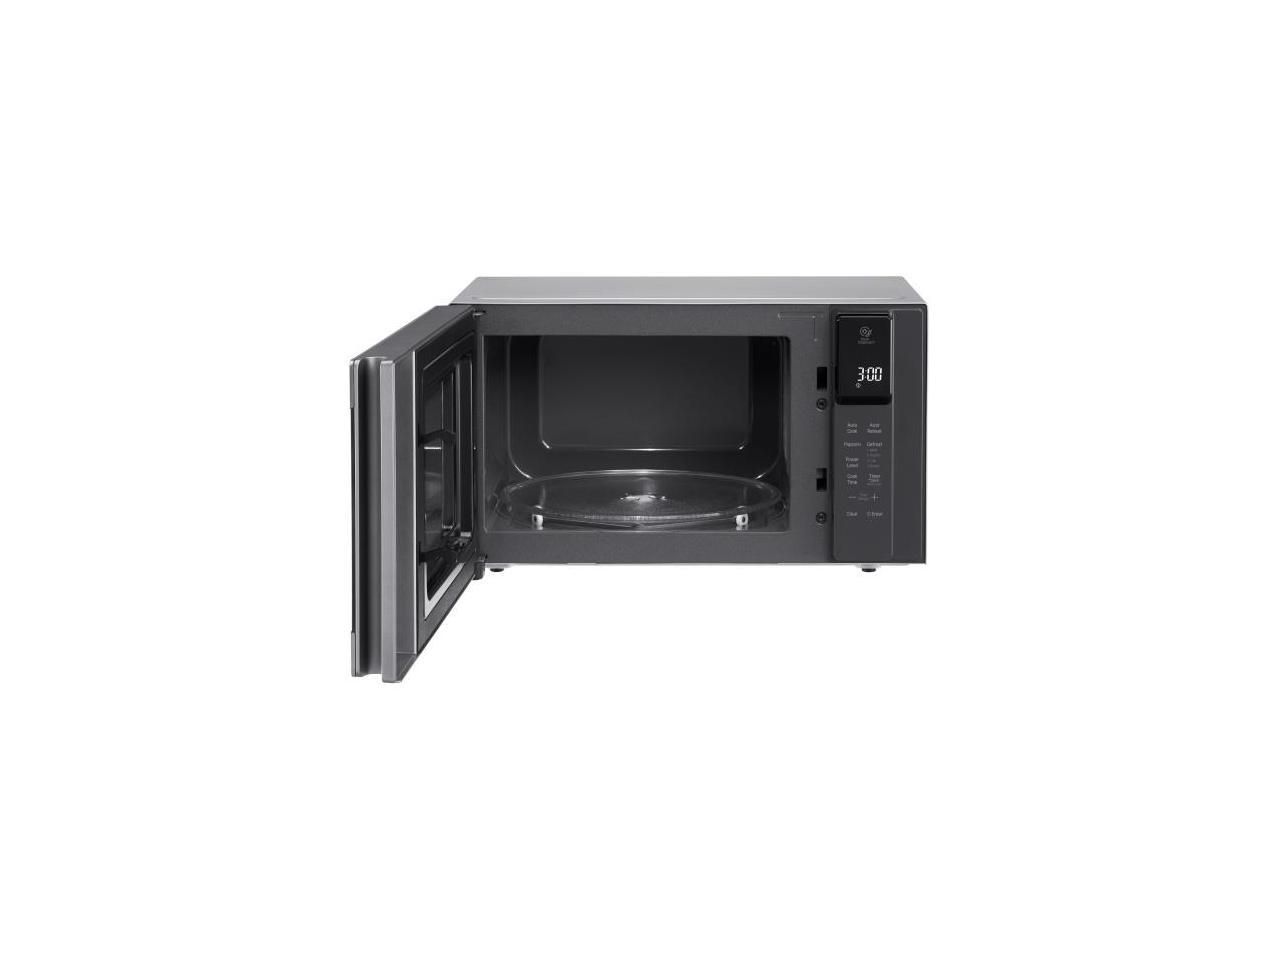 LG 0.9 cu. ft. NeoChef Countertop Microwave with Smart Inverter and